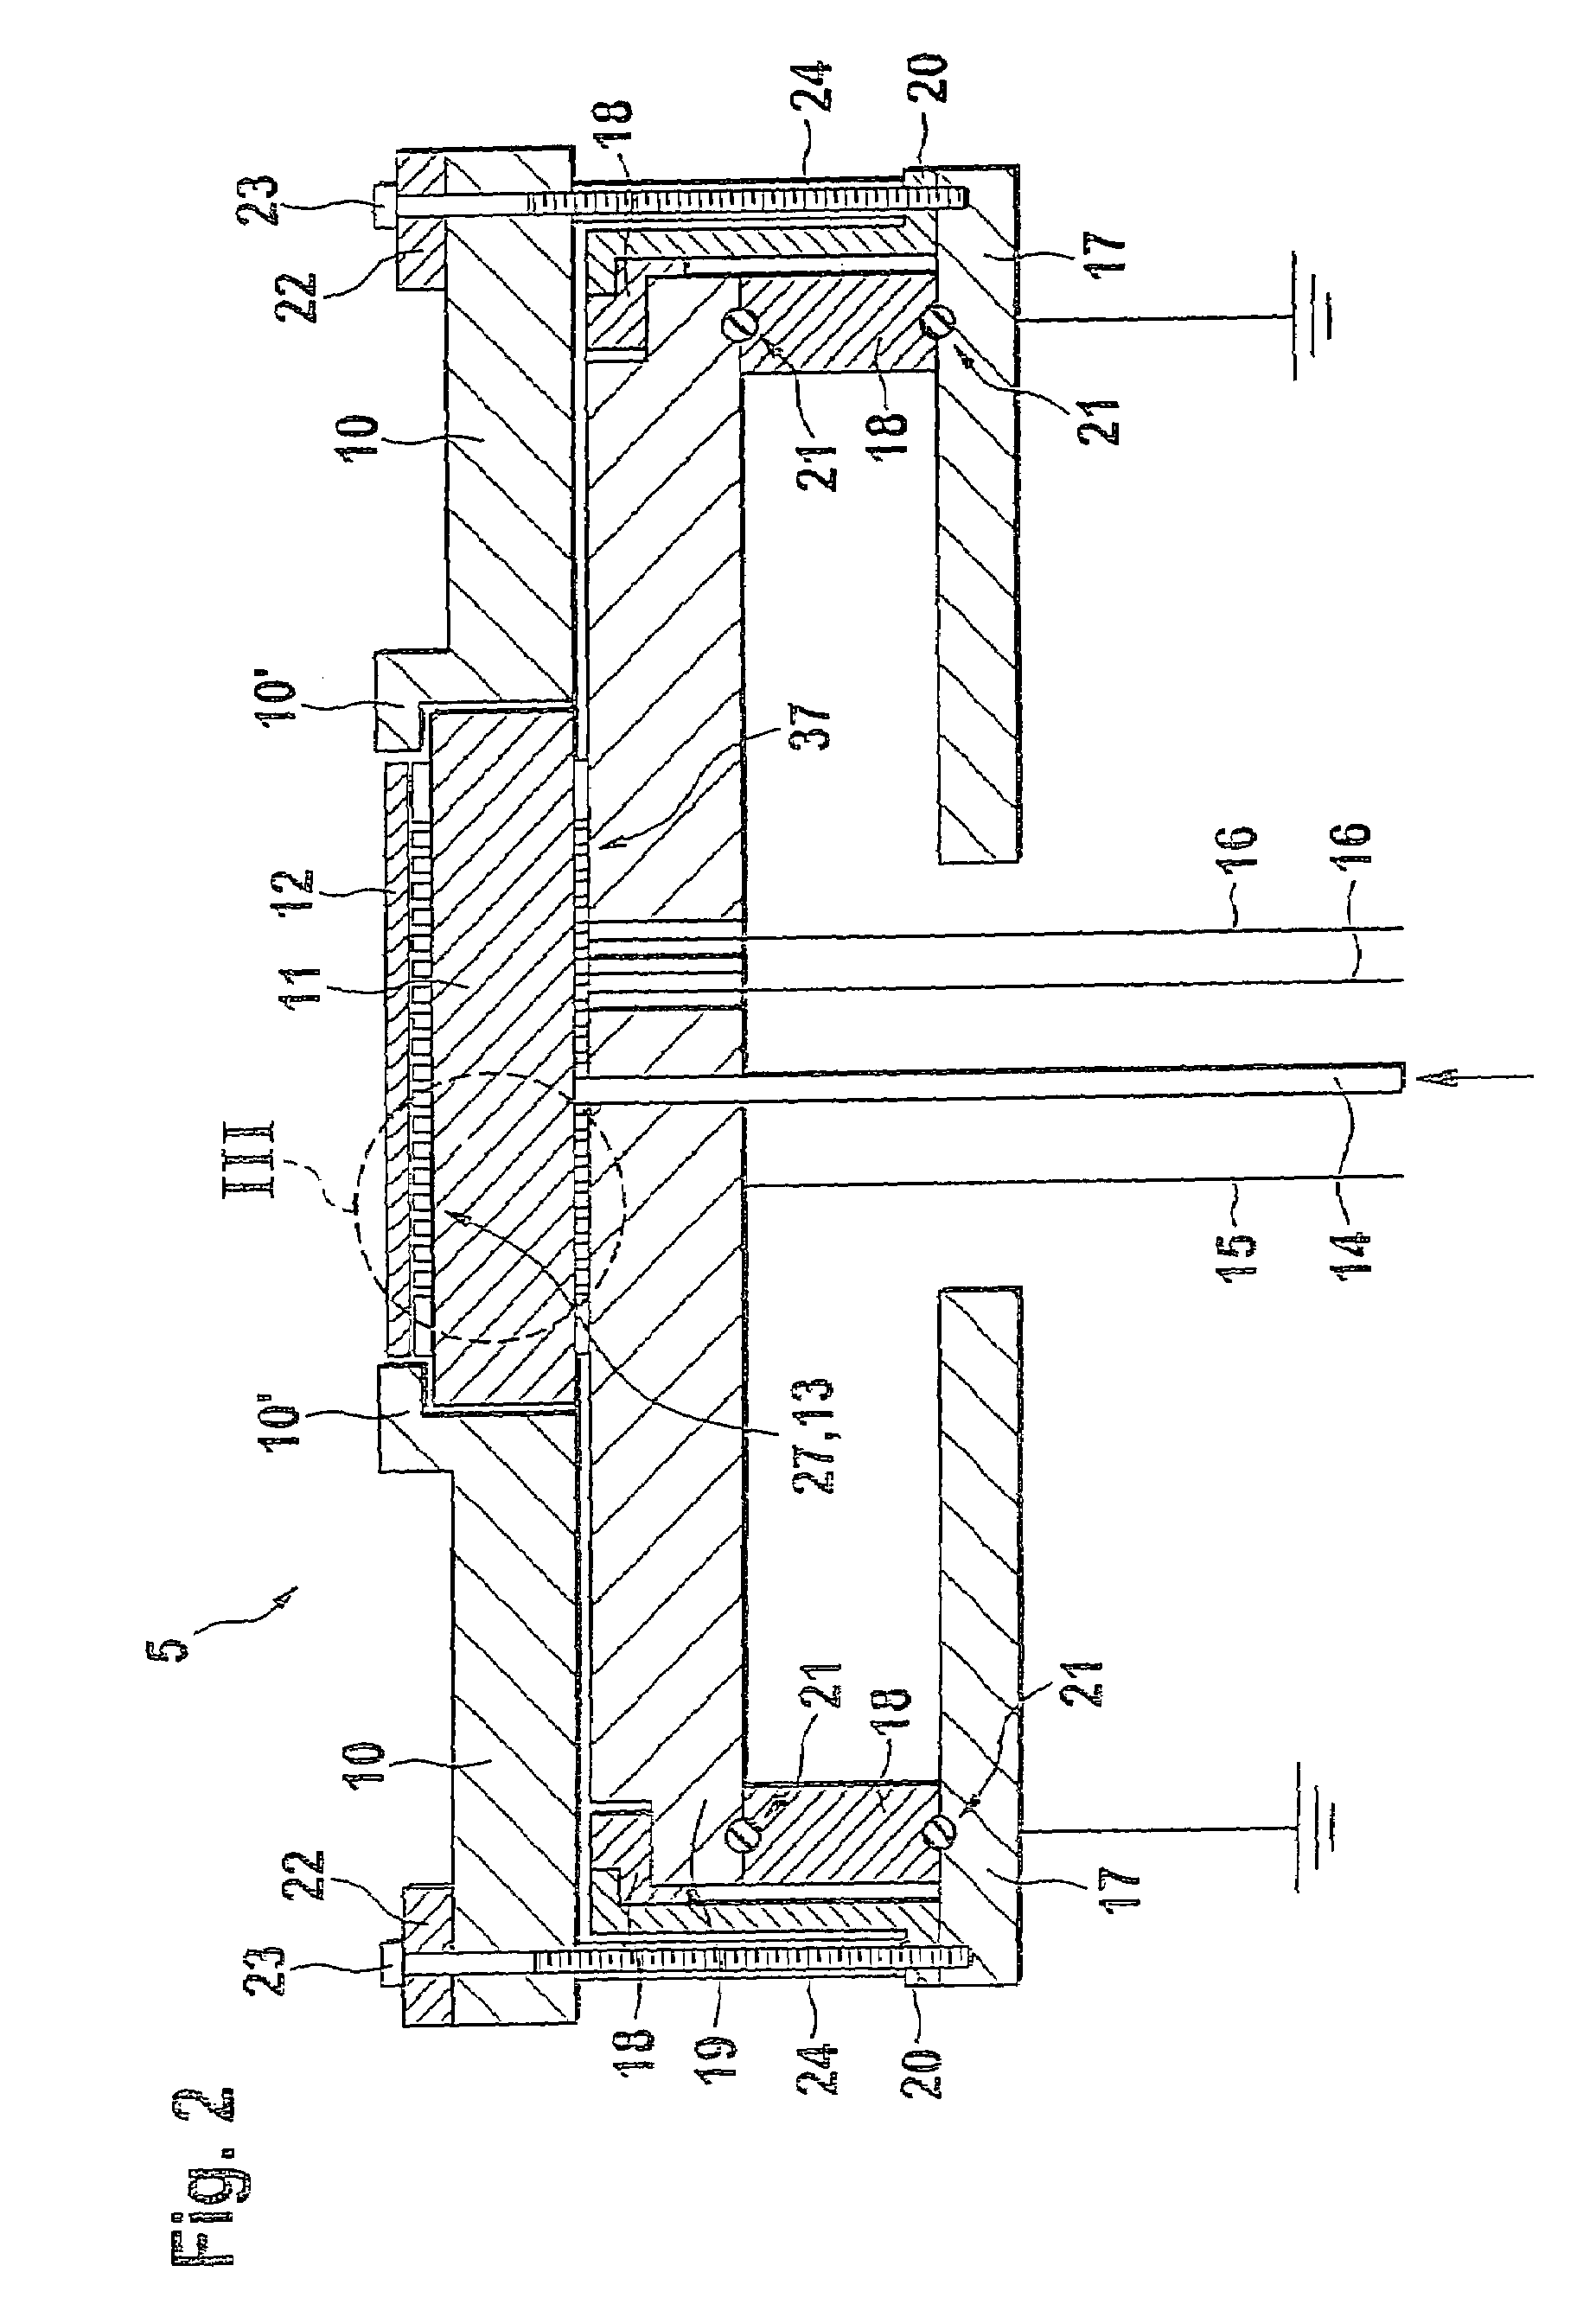 Holding device, in particular for fixing a semiconductor wafer in a plasma etching device, and method for supplying heat to or dissipating heat from a substrate